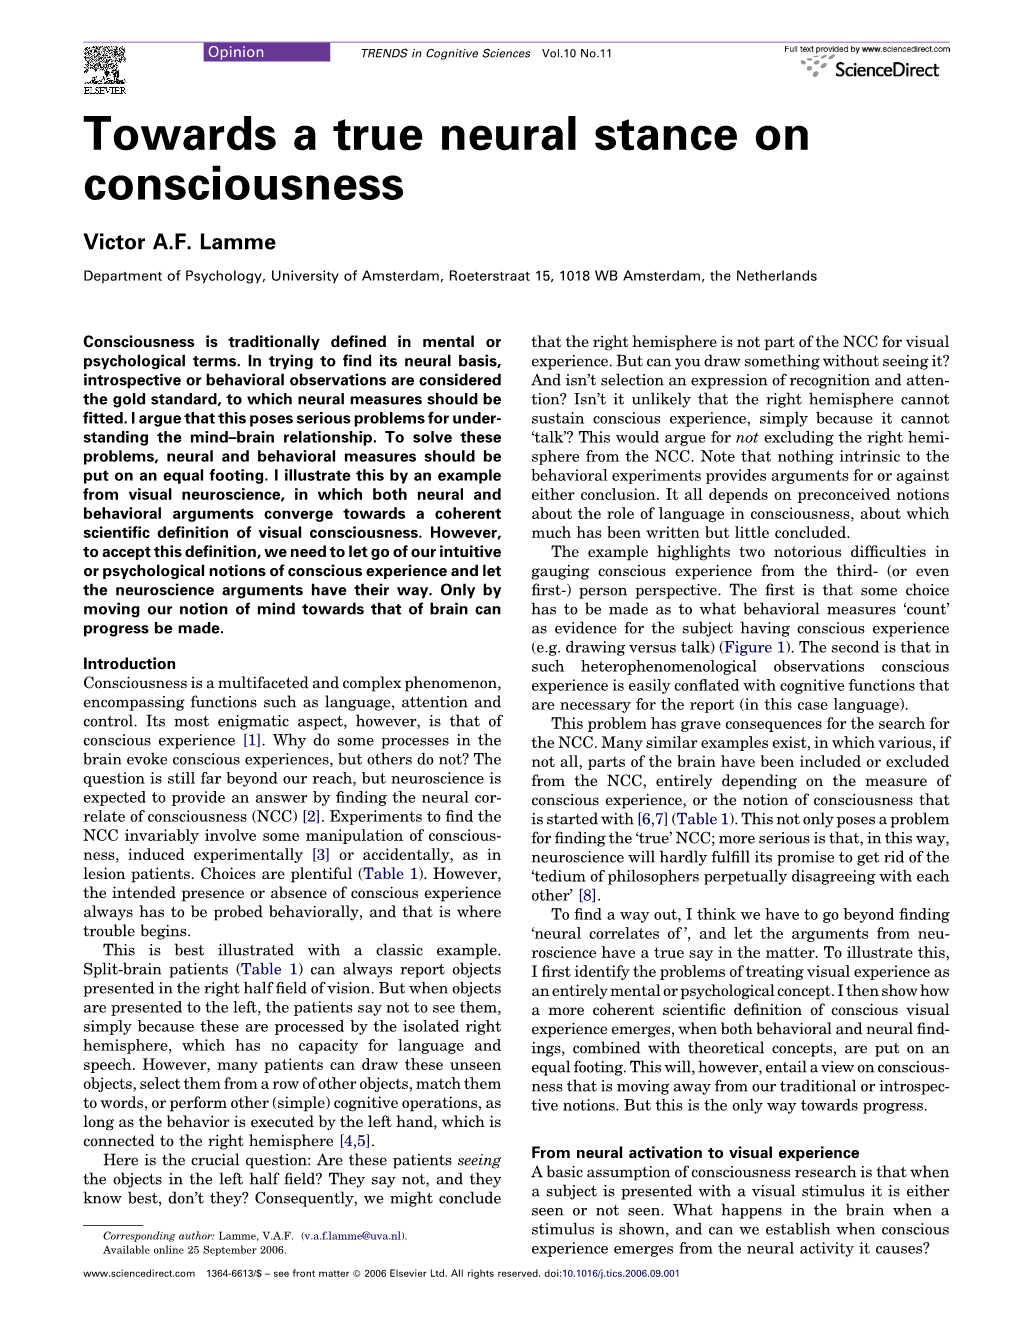 Towards a True Neural Stance on Consciousness